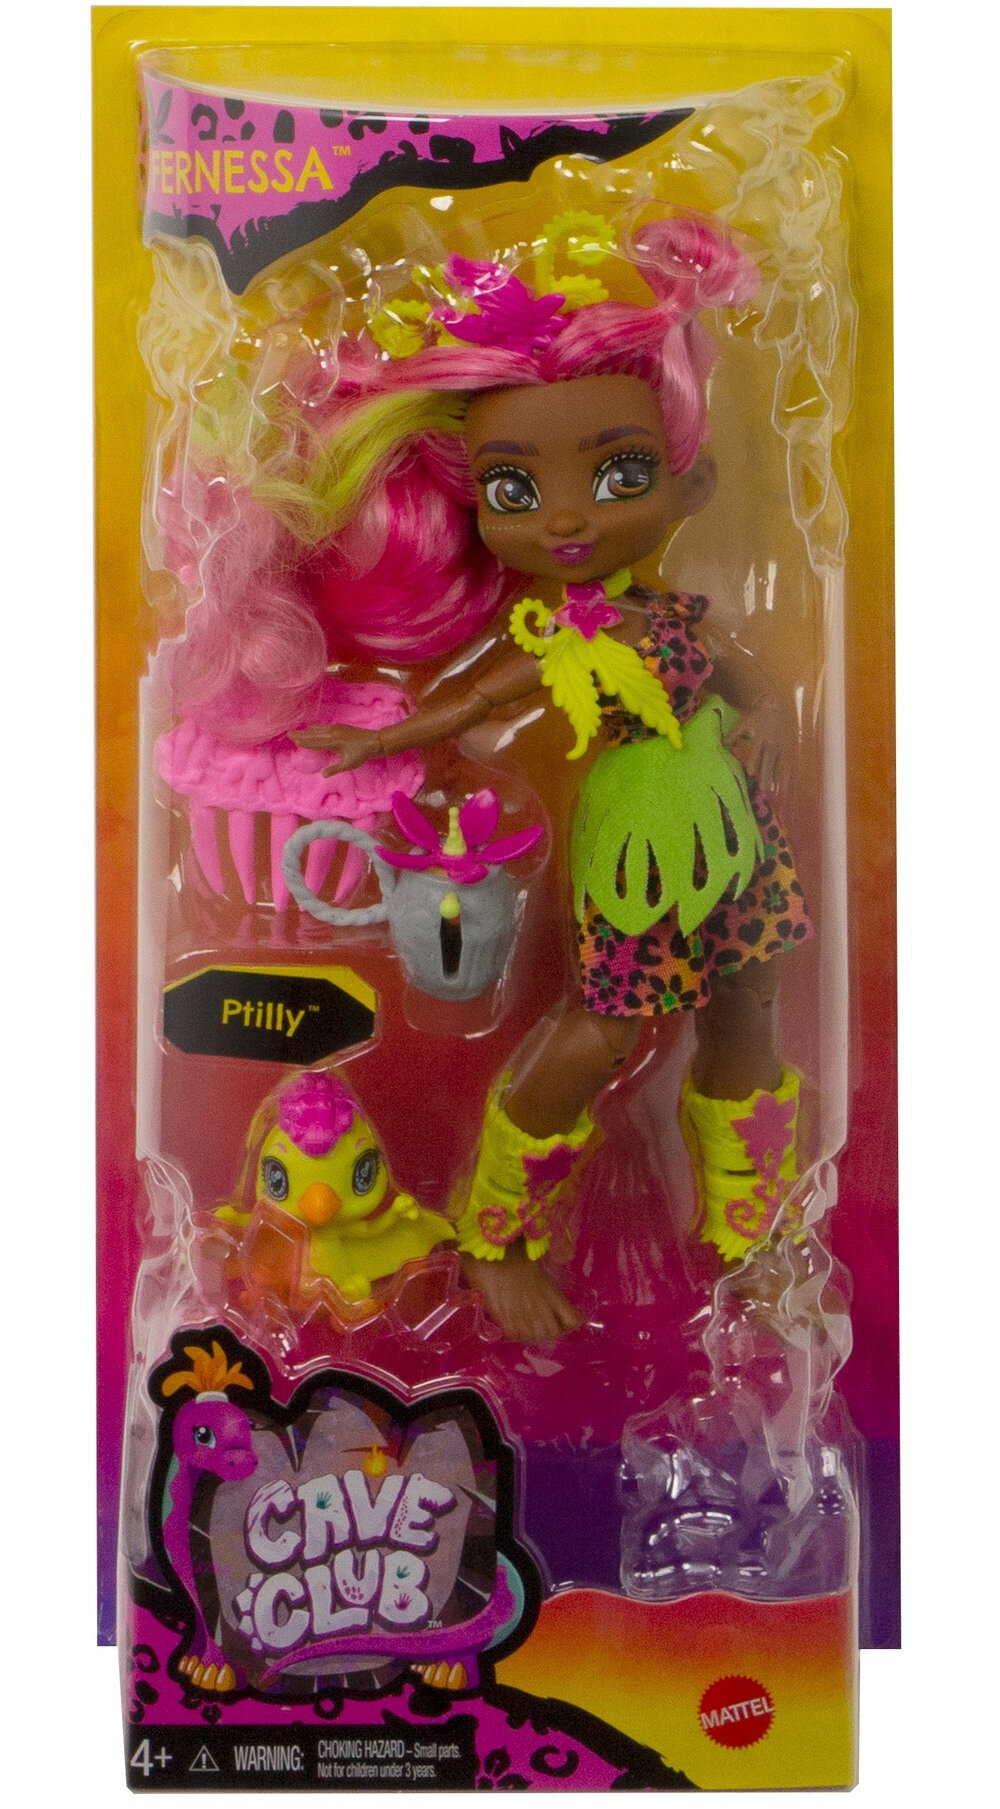 Cave Club Fernessa Doll (8 - 10-Inch) Prehistoric Fashion Doll with Dinosaur Pet - image 7 of 7